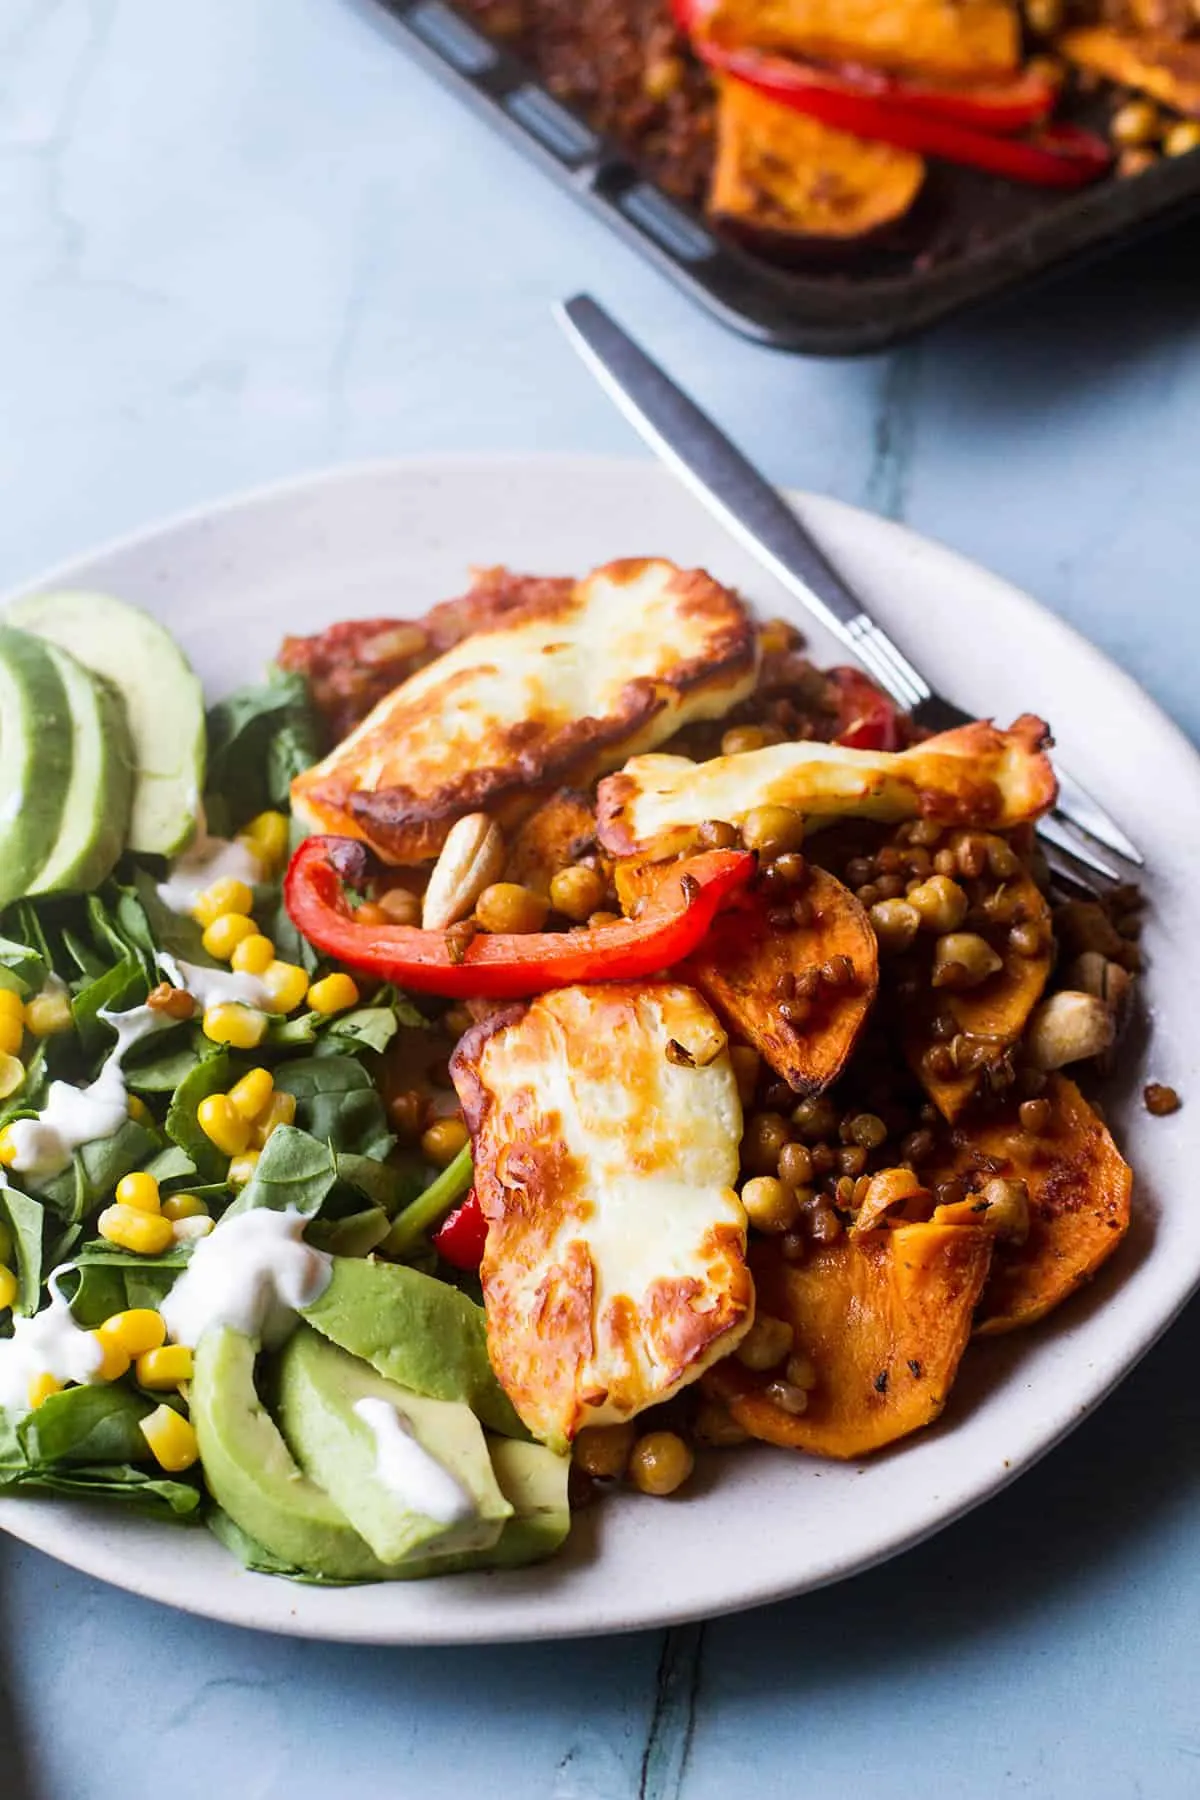 Sweet potato and bell pepper bake and a side salad on a white plate.